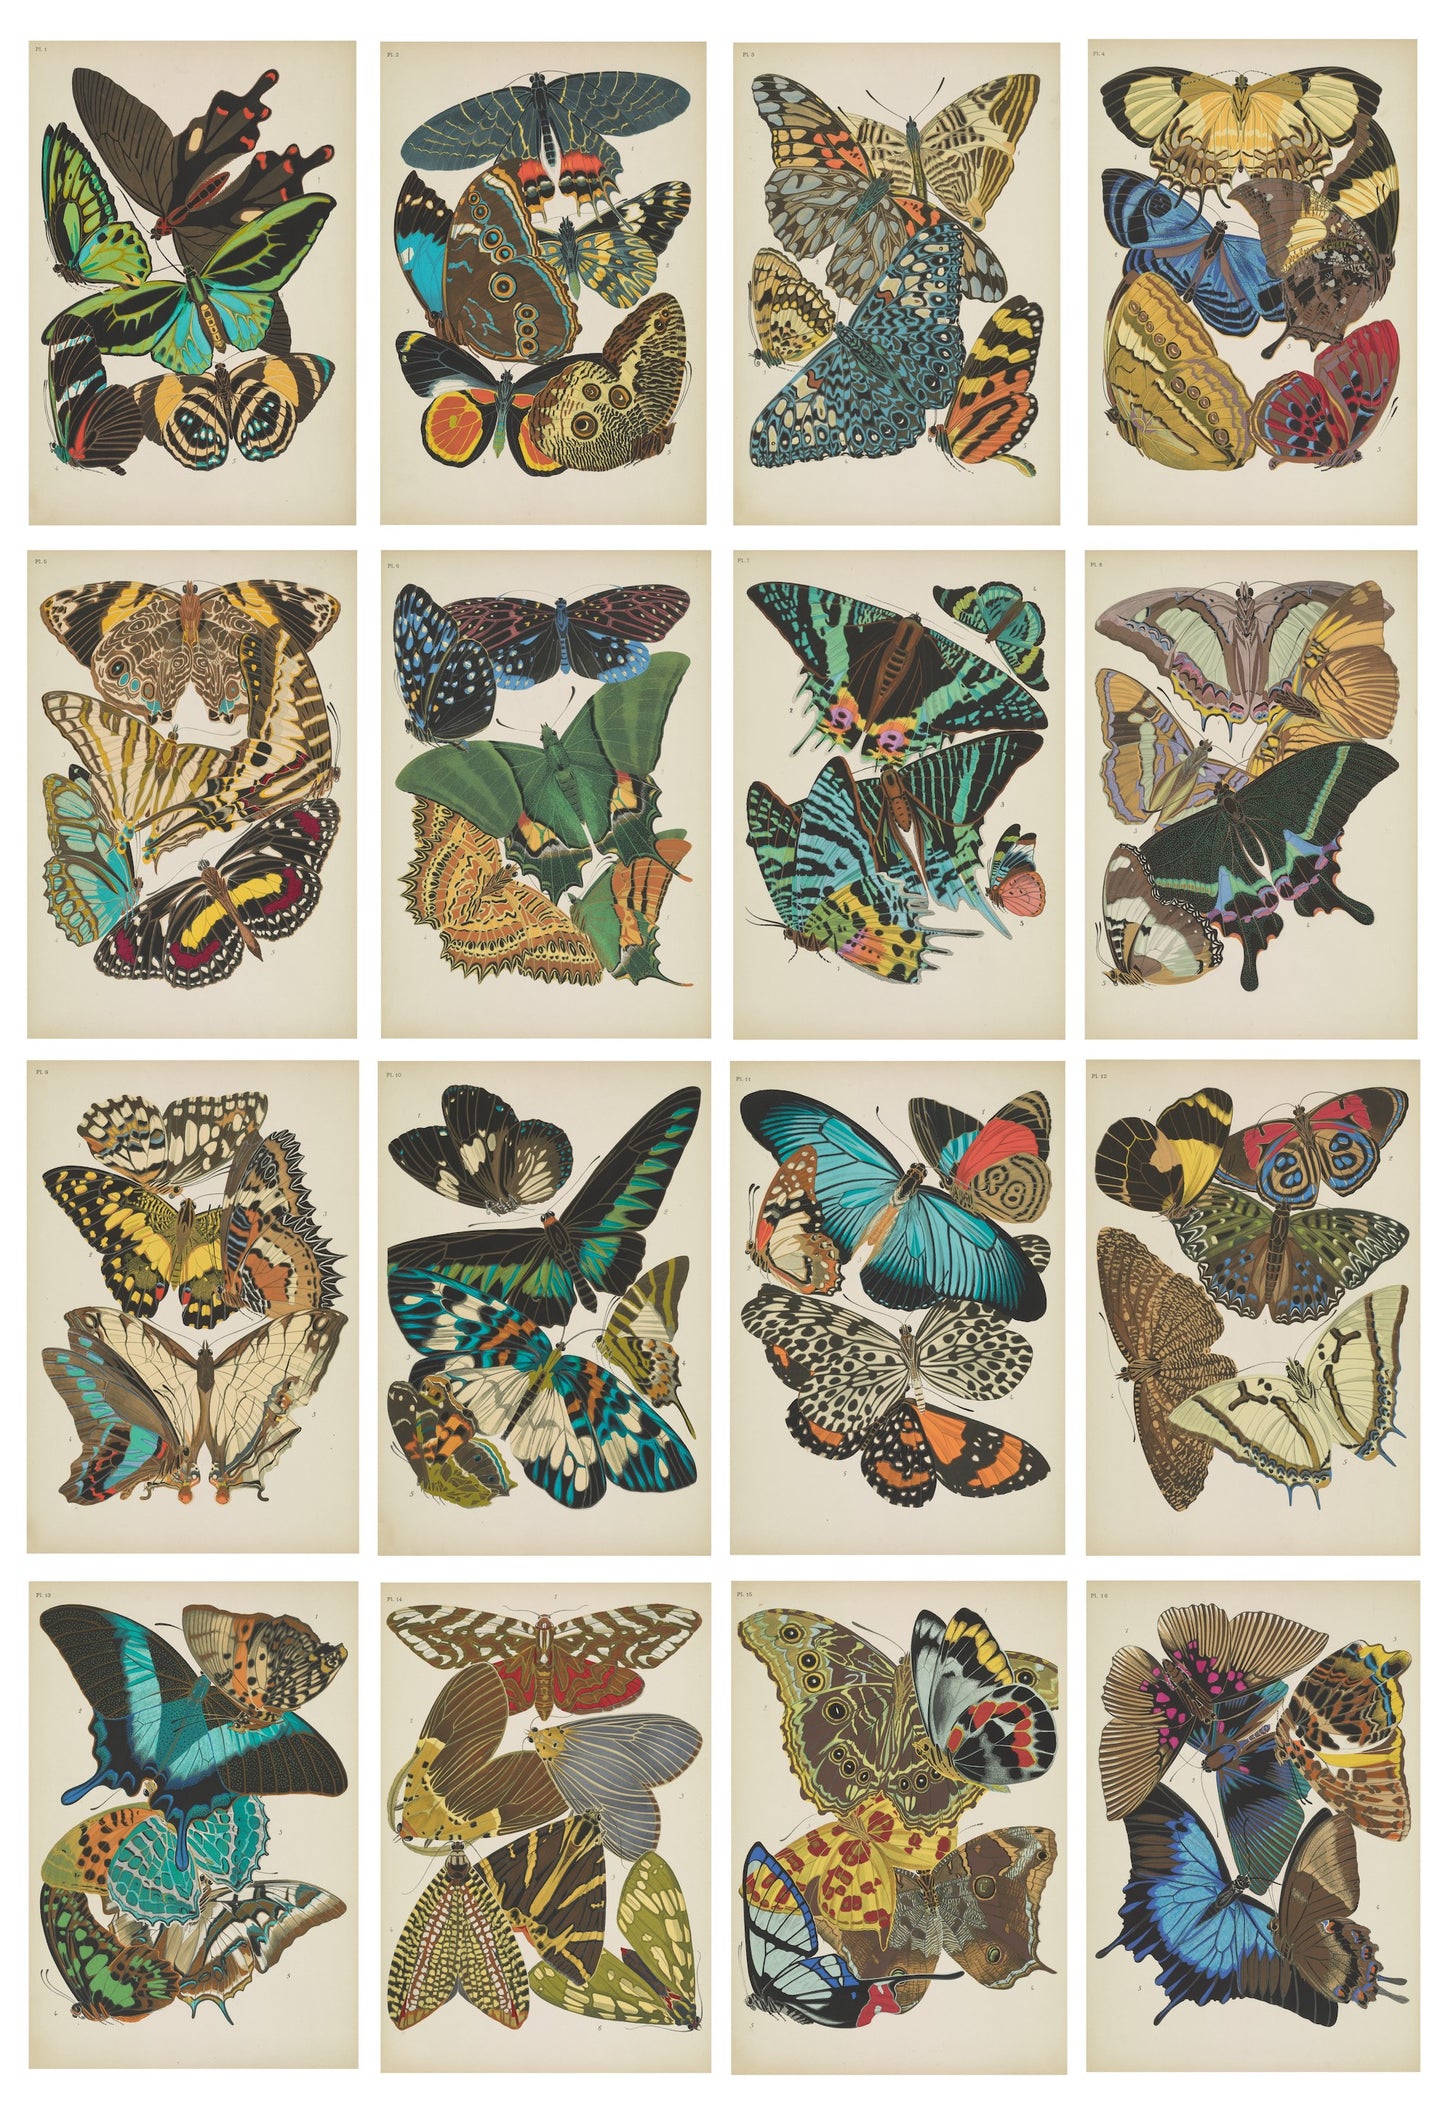 The Butterflies Postcard Collection by Emile-Allain Séguy